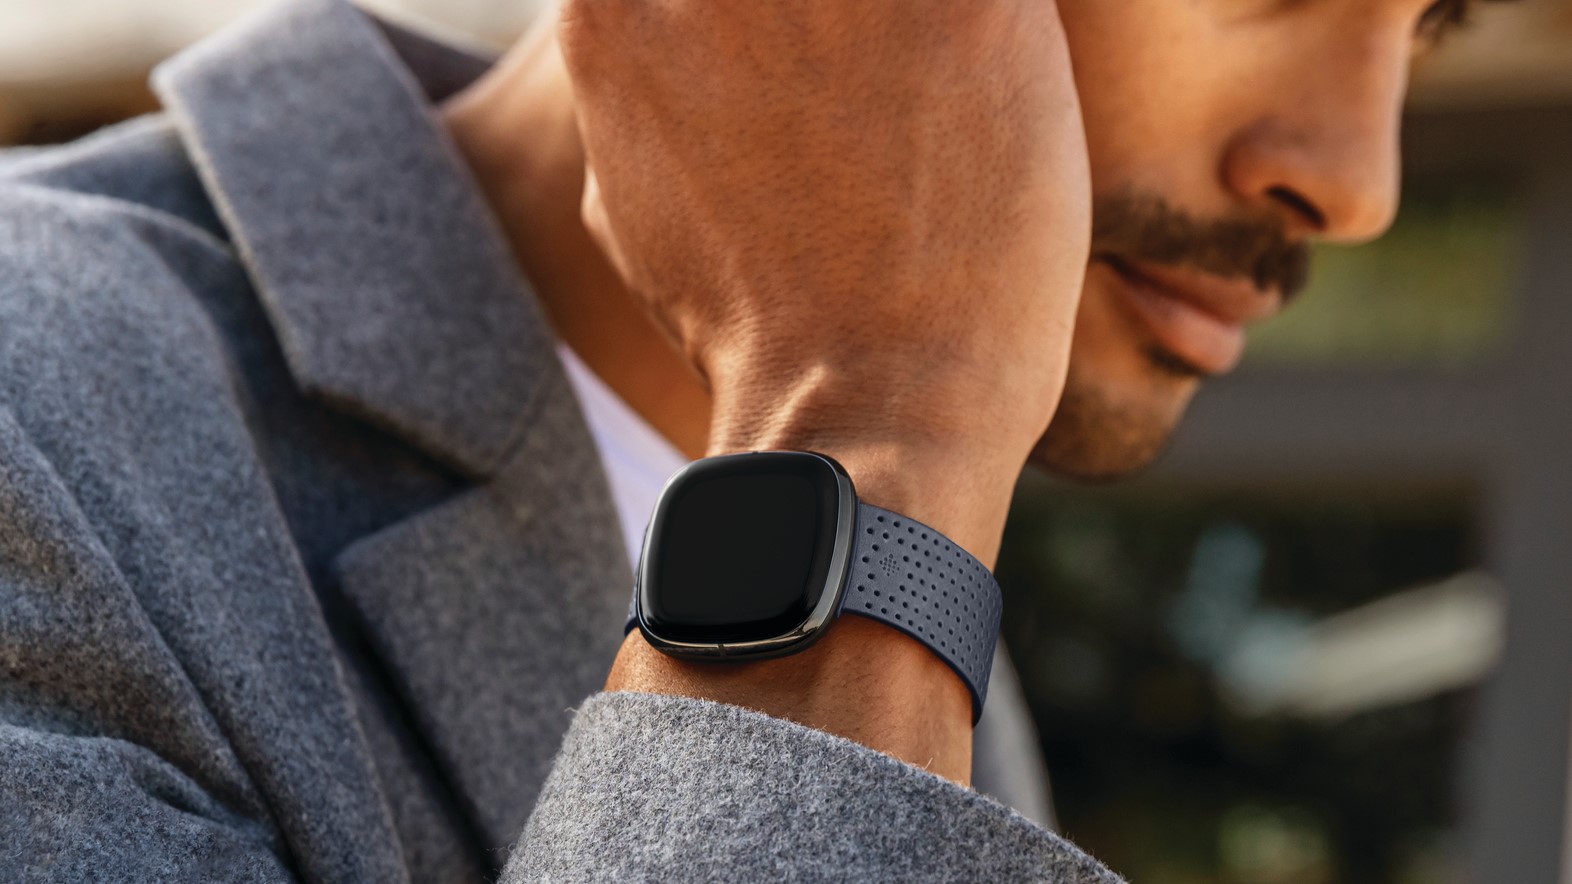 q2-wearables-in-2014-how-did-tech-s-new-suit-fit-techradar